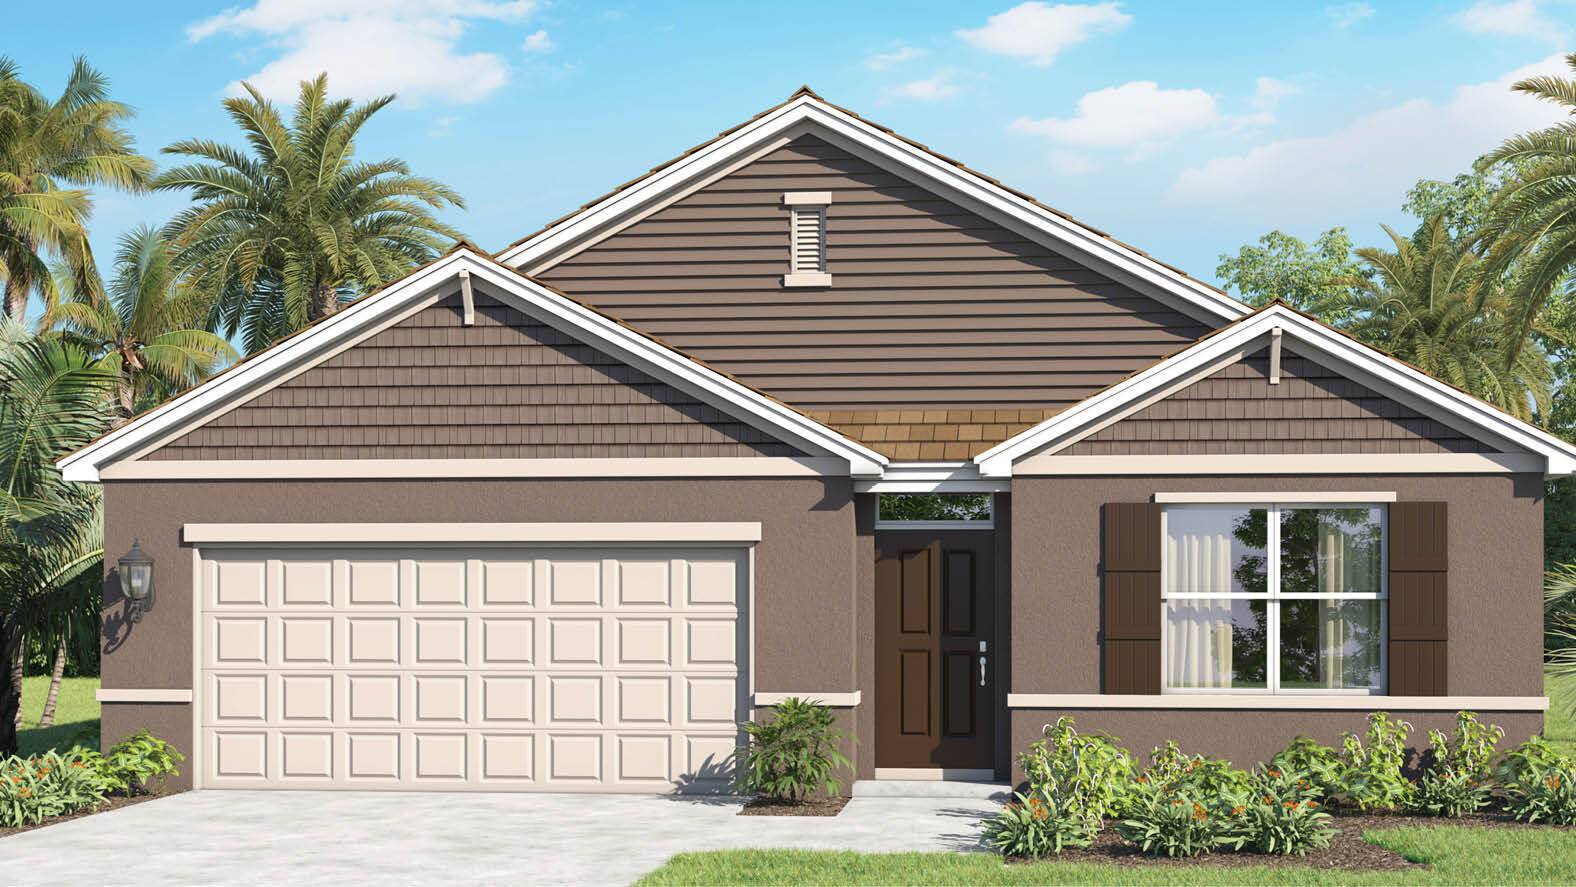 Brand new traditional Cali, 4 Bedroom, 2 bath, 2 car garage almost finished.